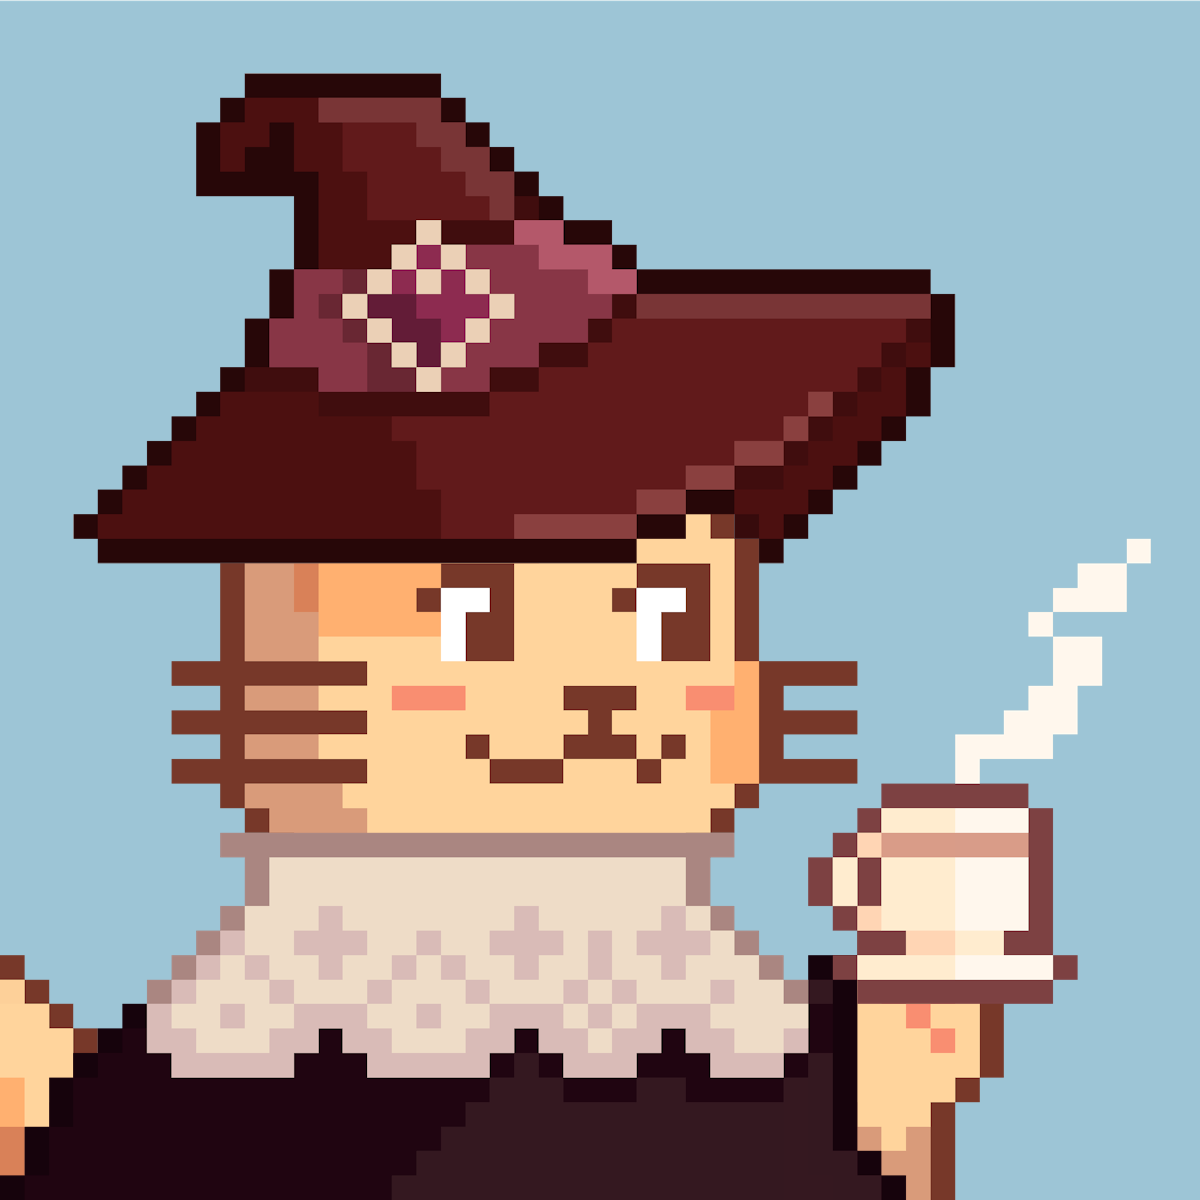 Witches without T, but love drinking tea. Duhhhh!!! $HAIRY #TheBeneCatwiches